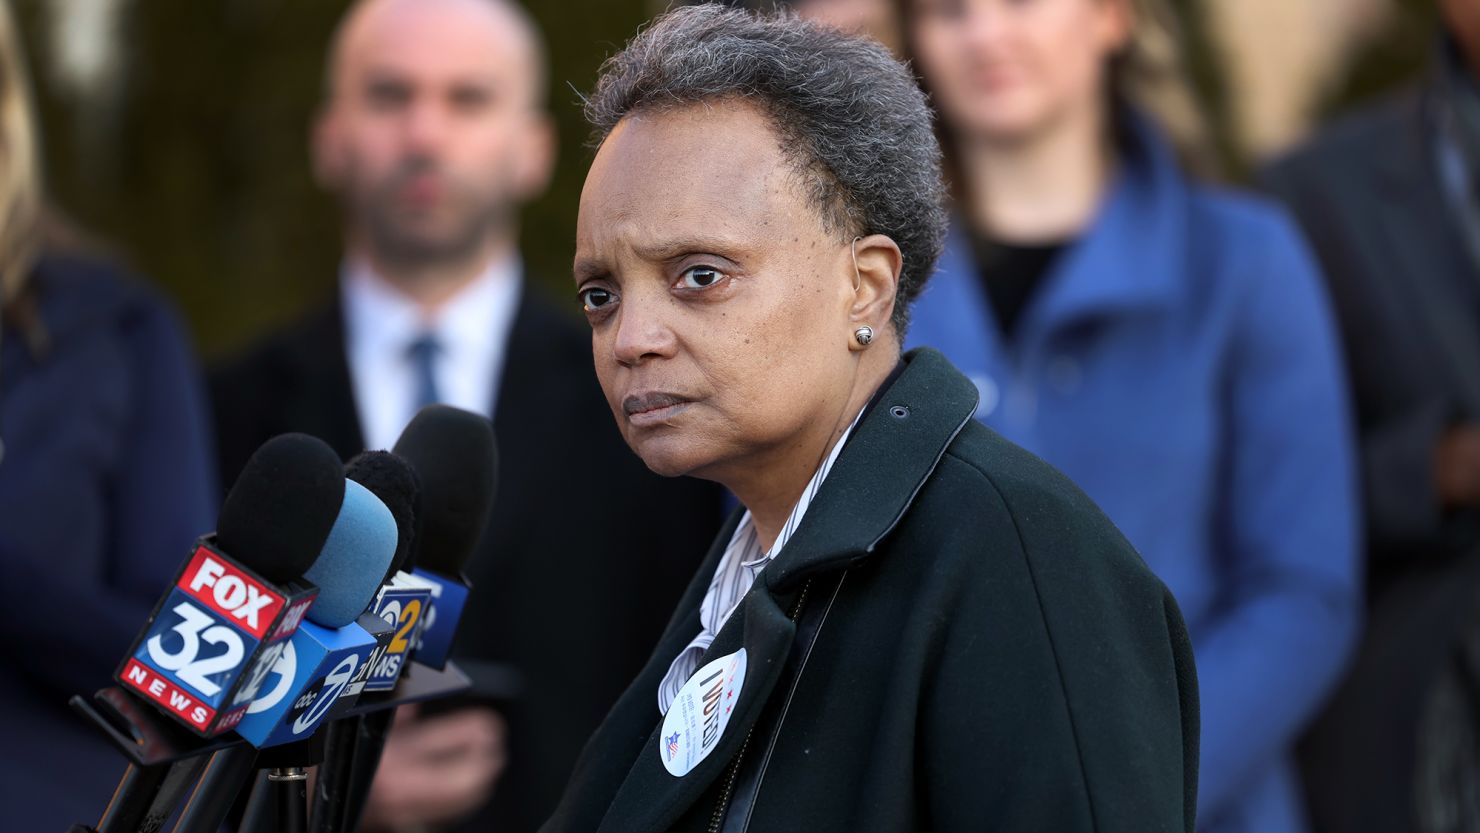 Chicago Mayor Lori Lightfoot speaks with the press after casting her ballot at an early voting location on February 20, 2023.